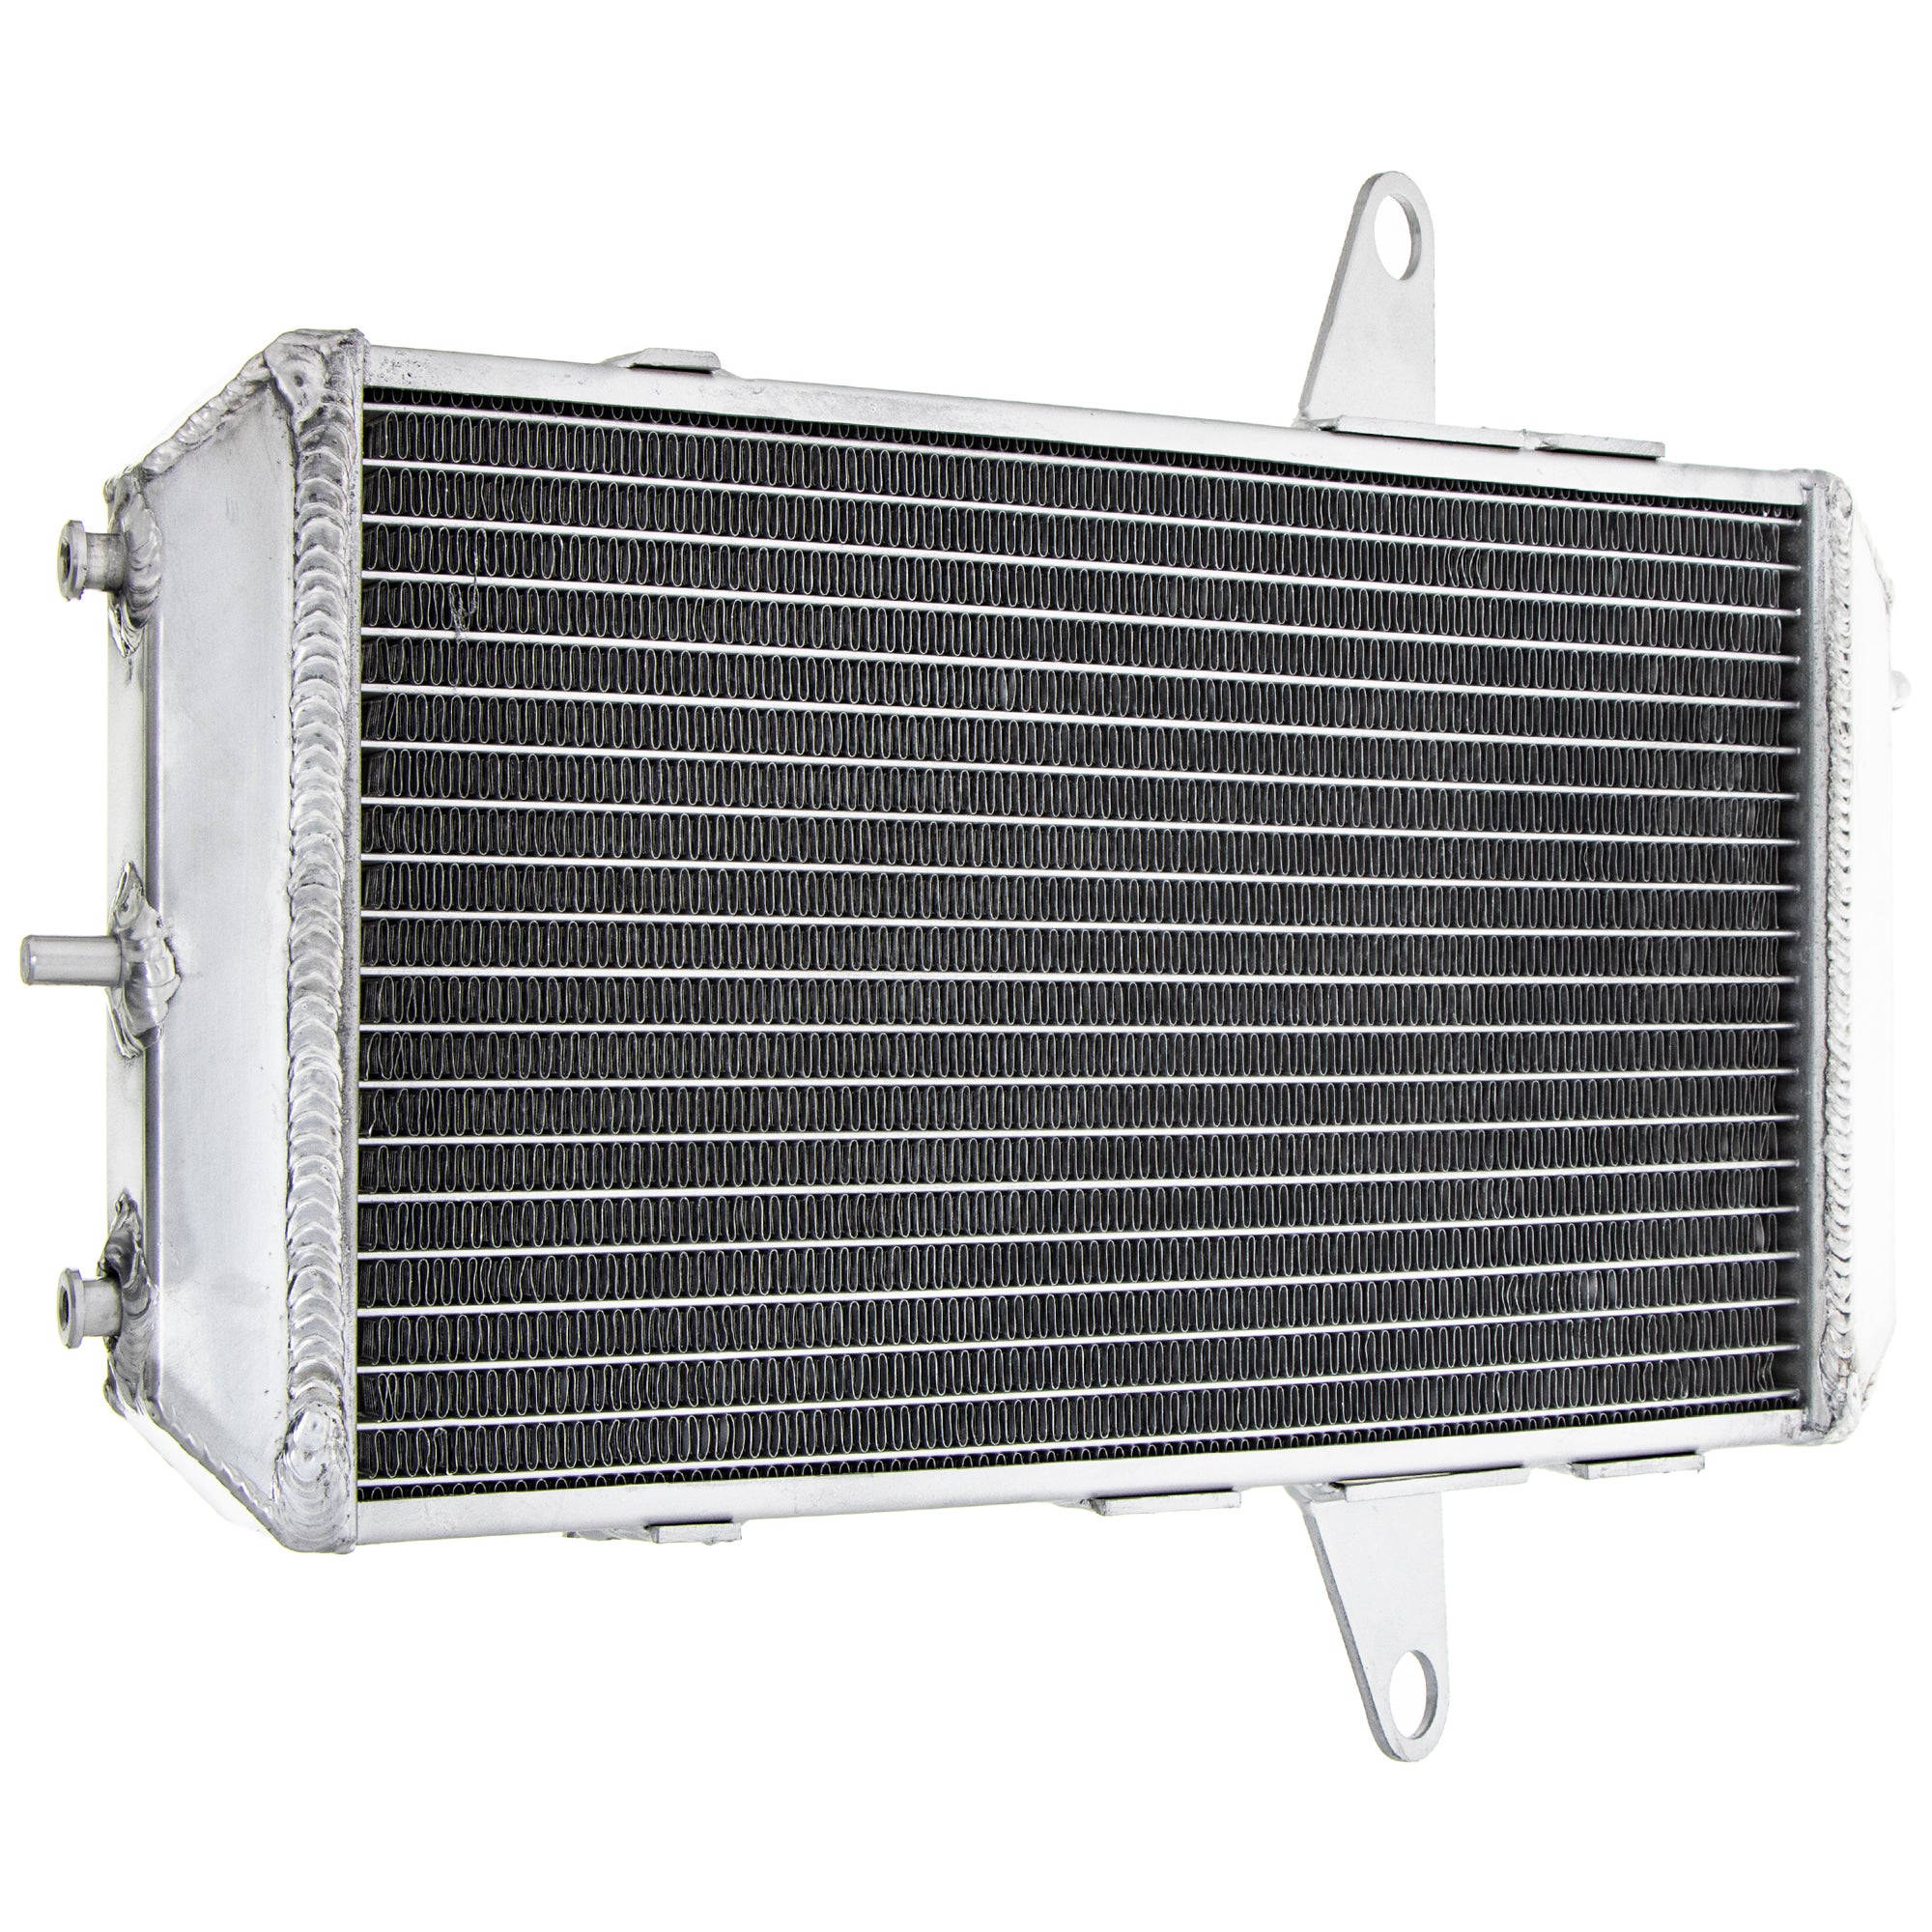 High Capacity Radiator For Can-Am 709200152